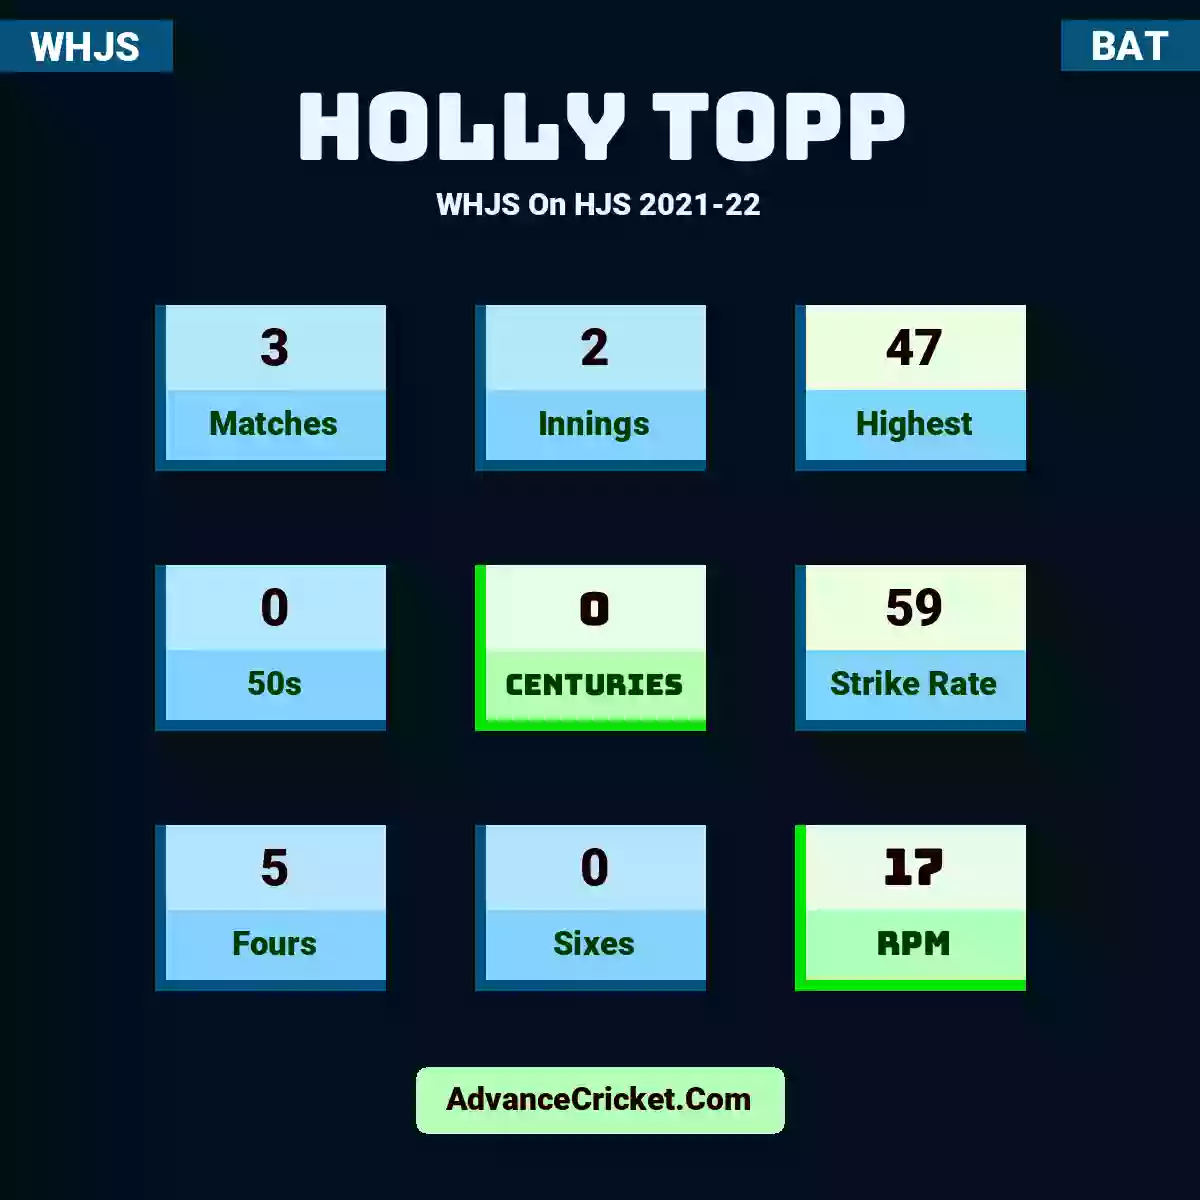 Holly Topp WHJS  On HJS 2021-22, Holly Topp played 3 matches, scored 47 runs as highest, 0 half-centuries, and 0 centuries, with a strike rate of 59. H.Topp hit 5 fours and 0 sixes, with an RPM of 17.